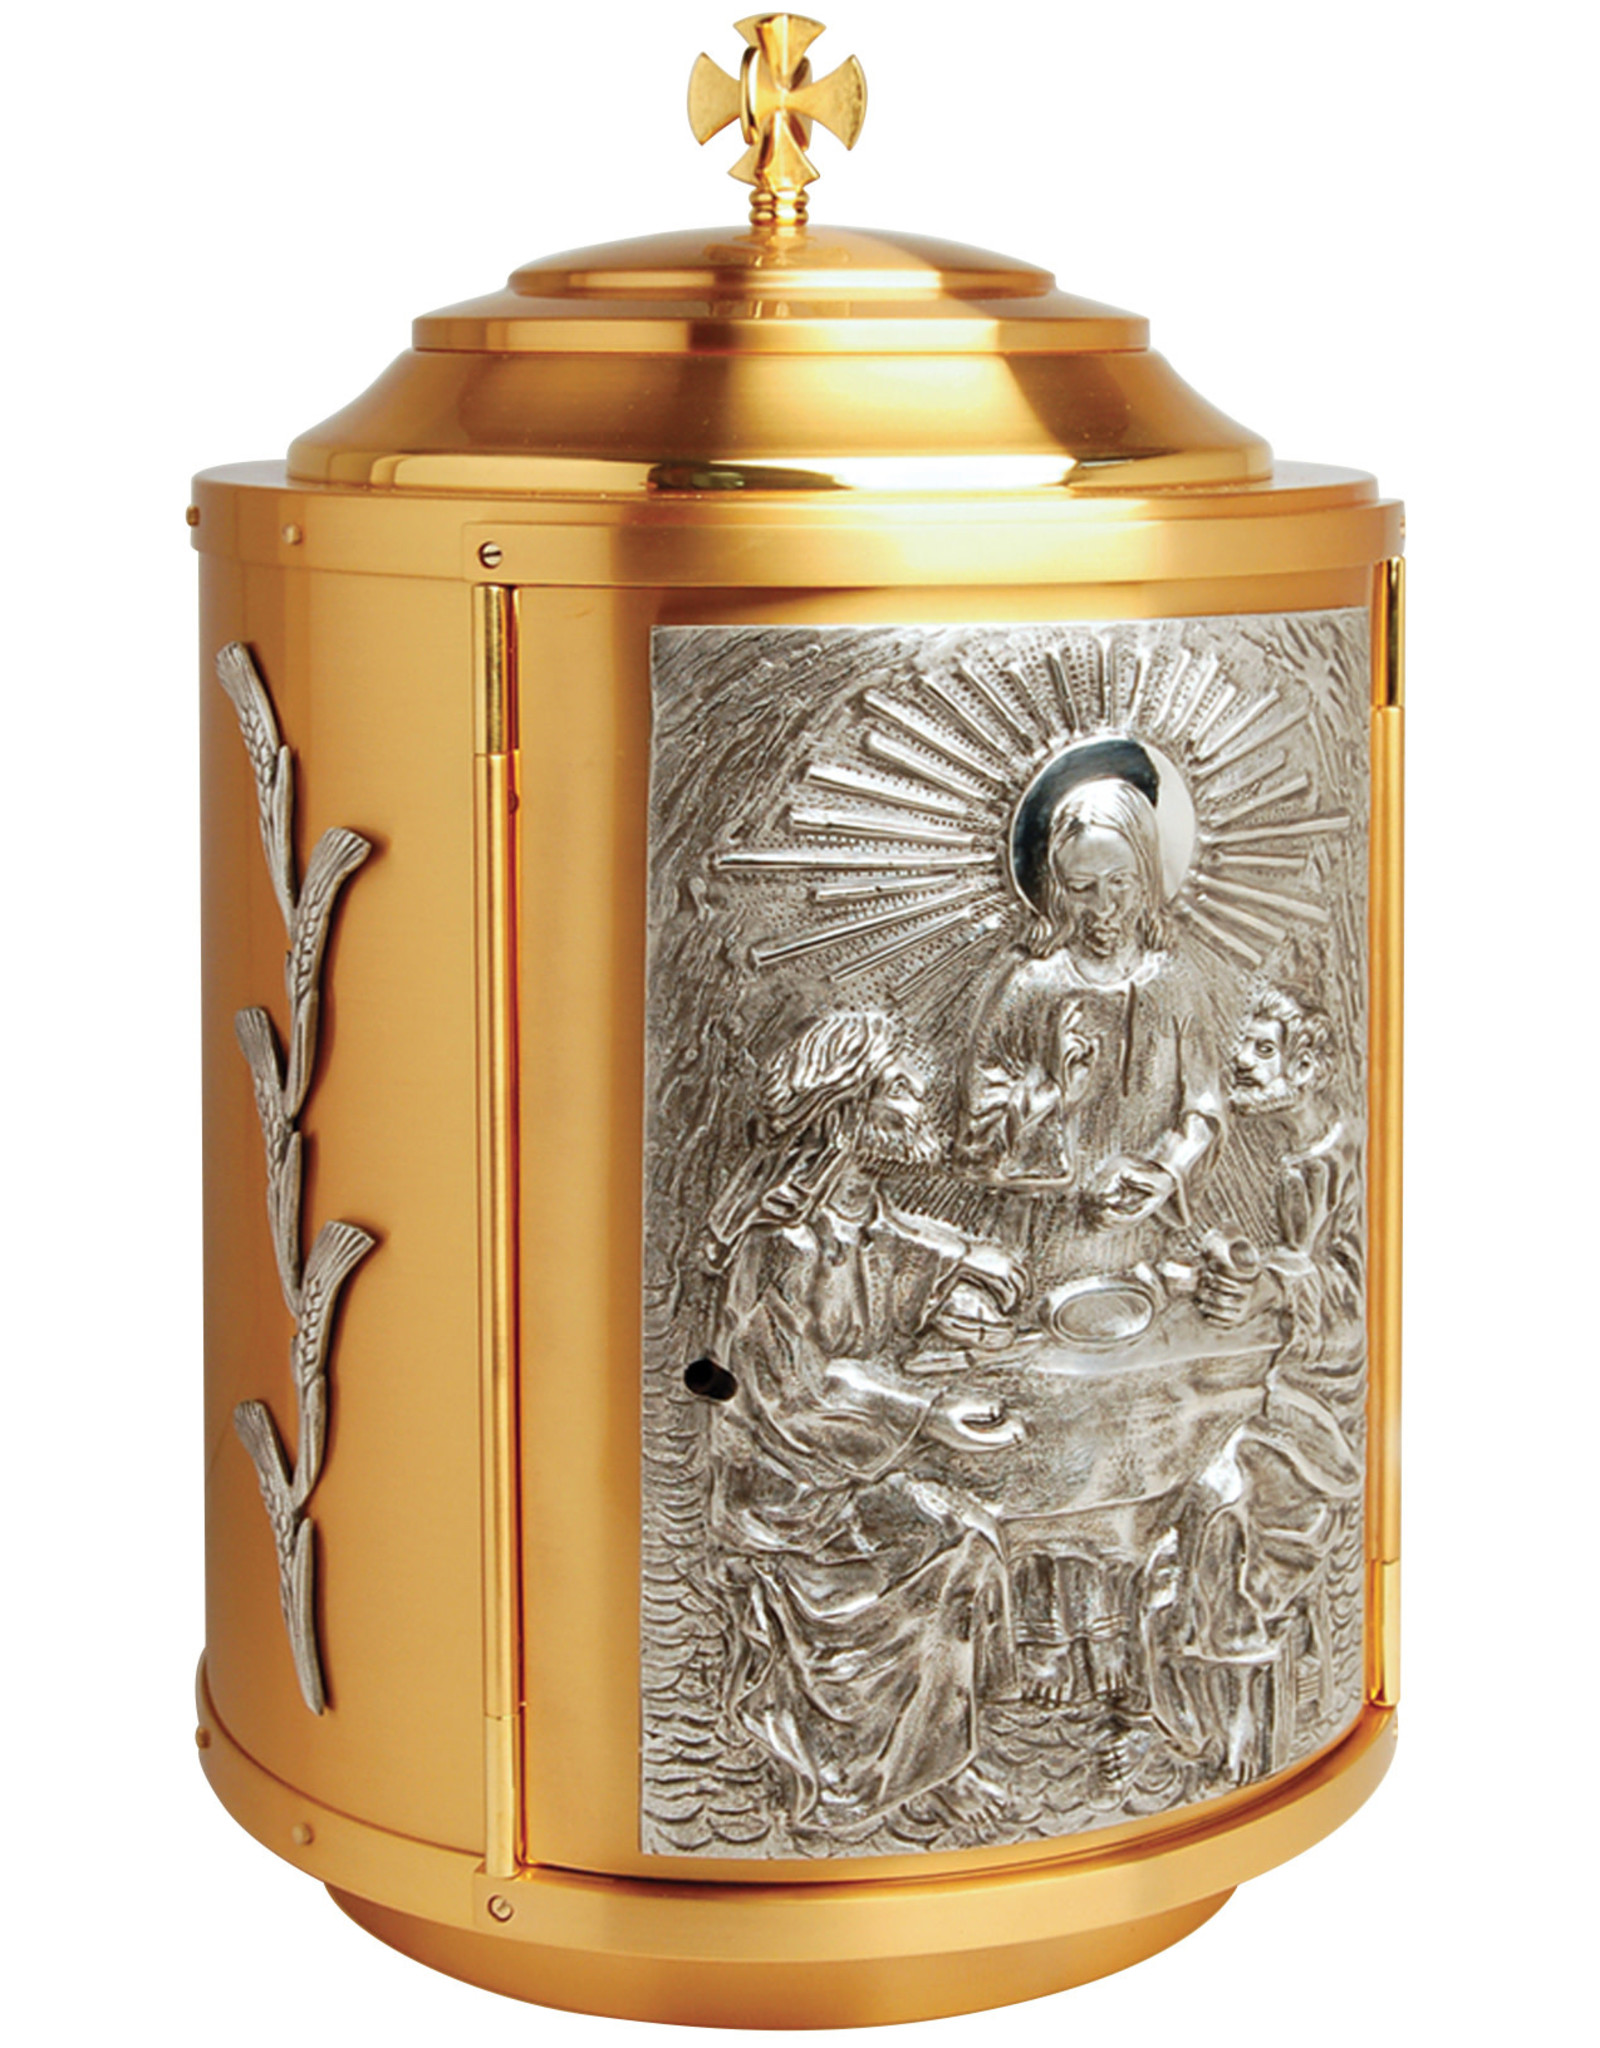 Koleys Tabernacle Gold Plated with Silver Plated Accents